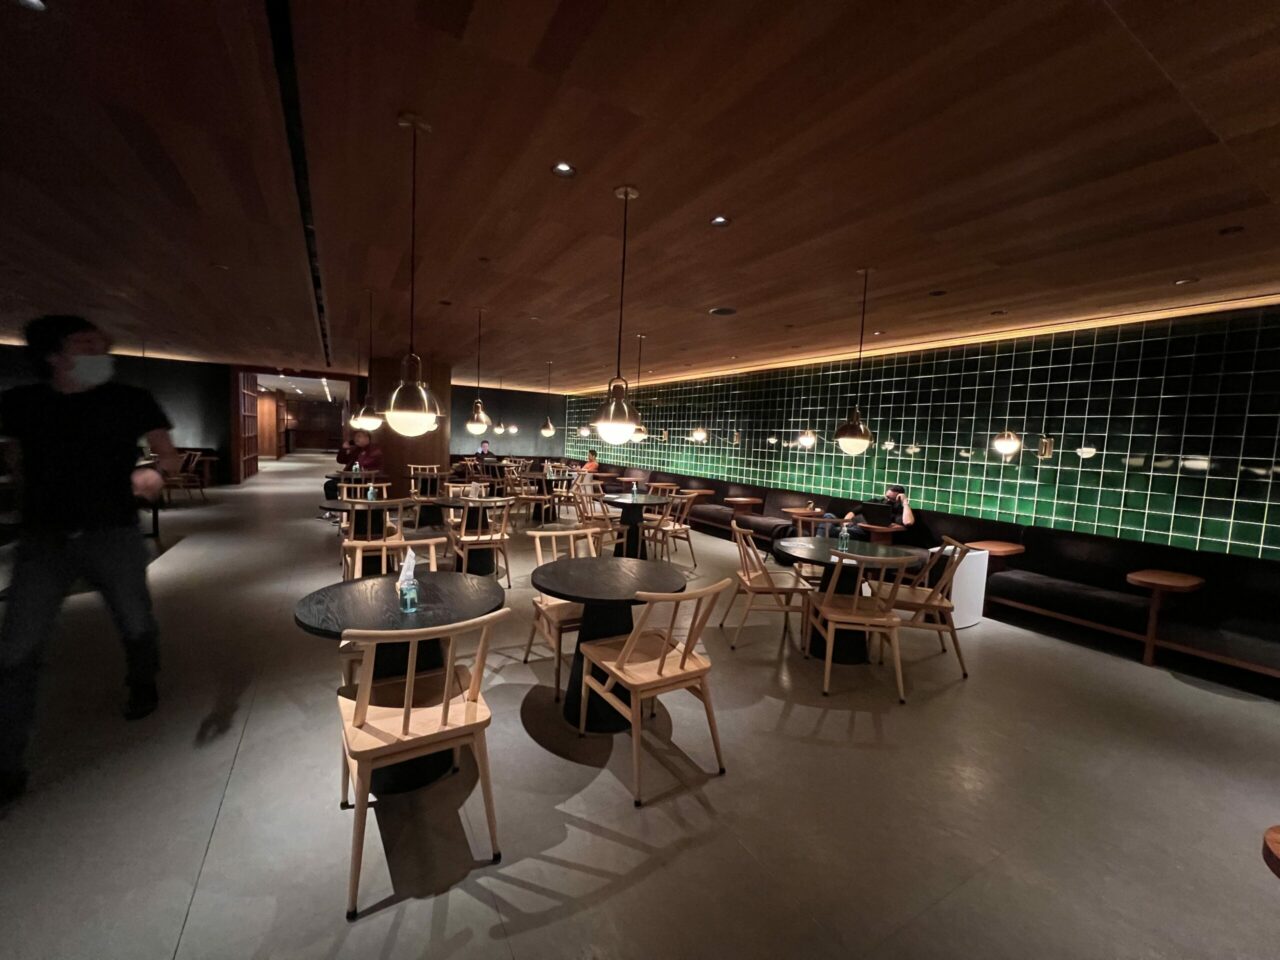 How is Cathay Pacific's 'The Pier' Business Class Lounge holding